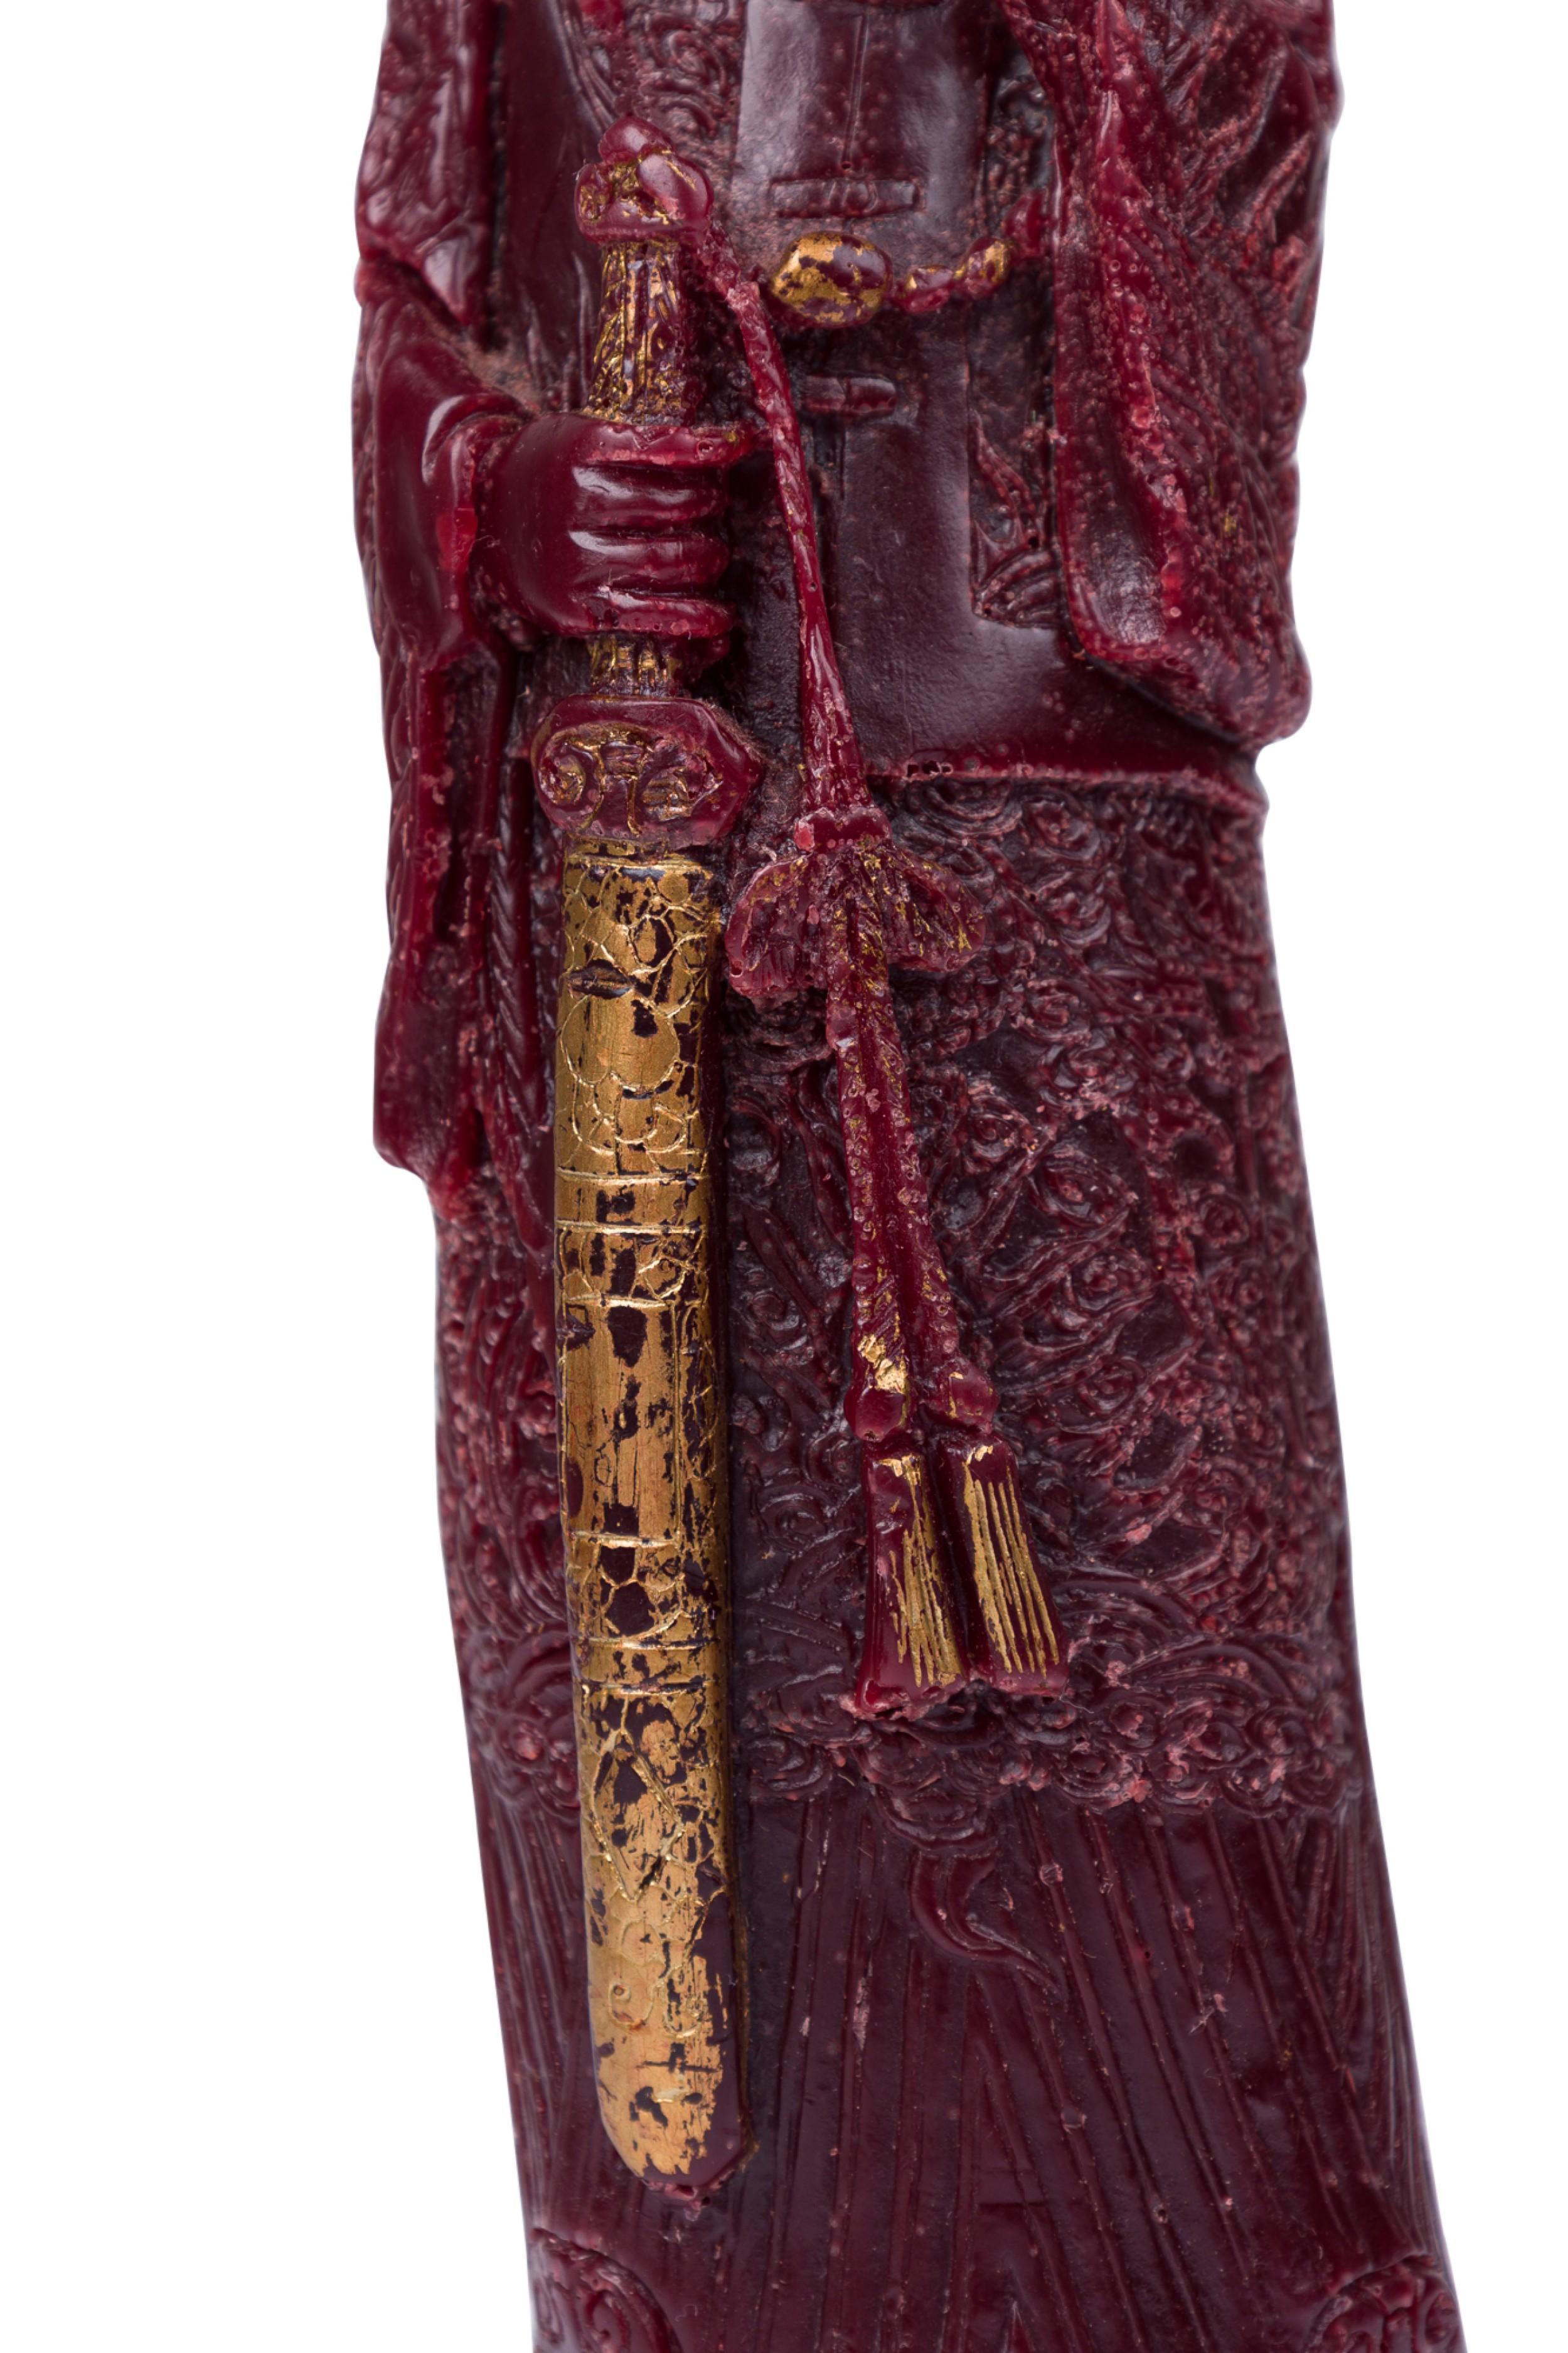 Chinese Wax Candle Figure Depicting an Emperor For Sale 2